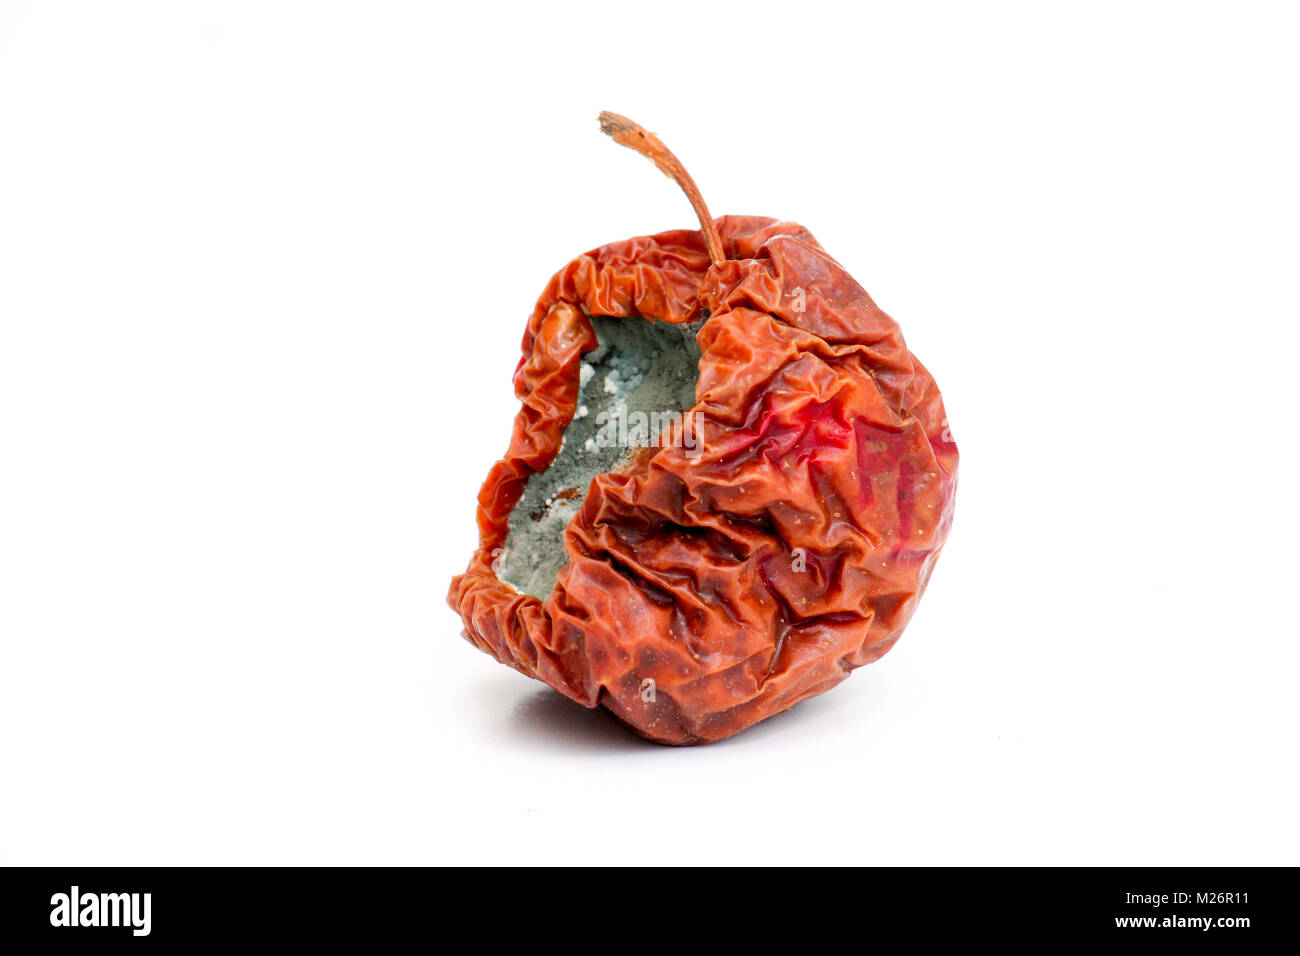 Half a rotten apple on white background,image of a Stock Photo